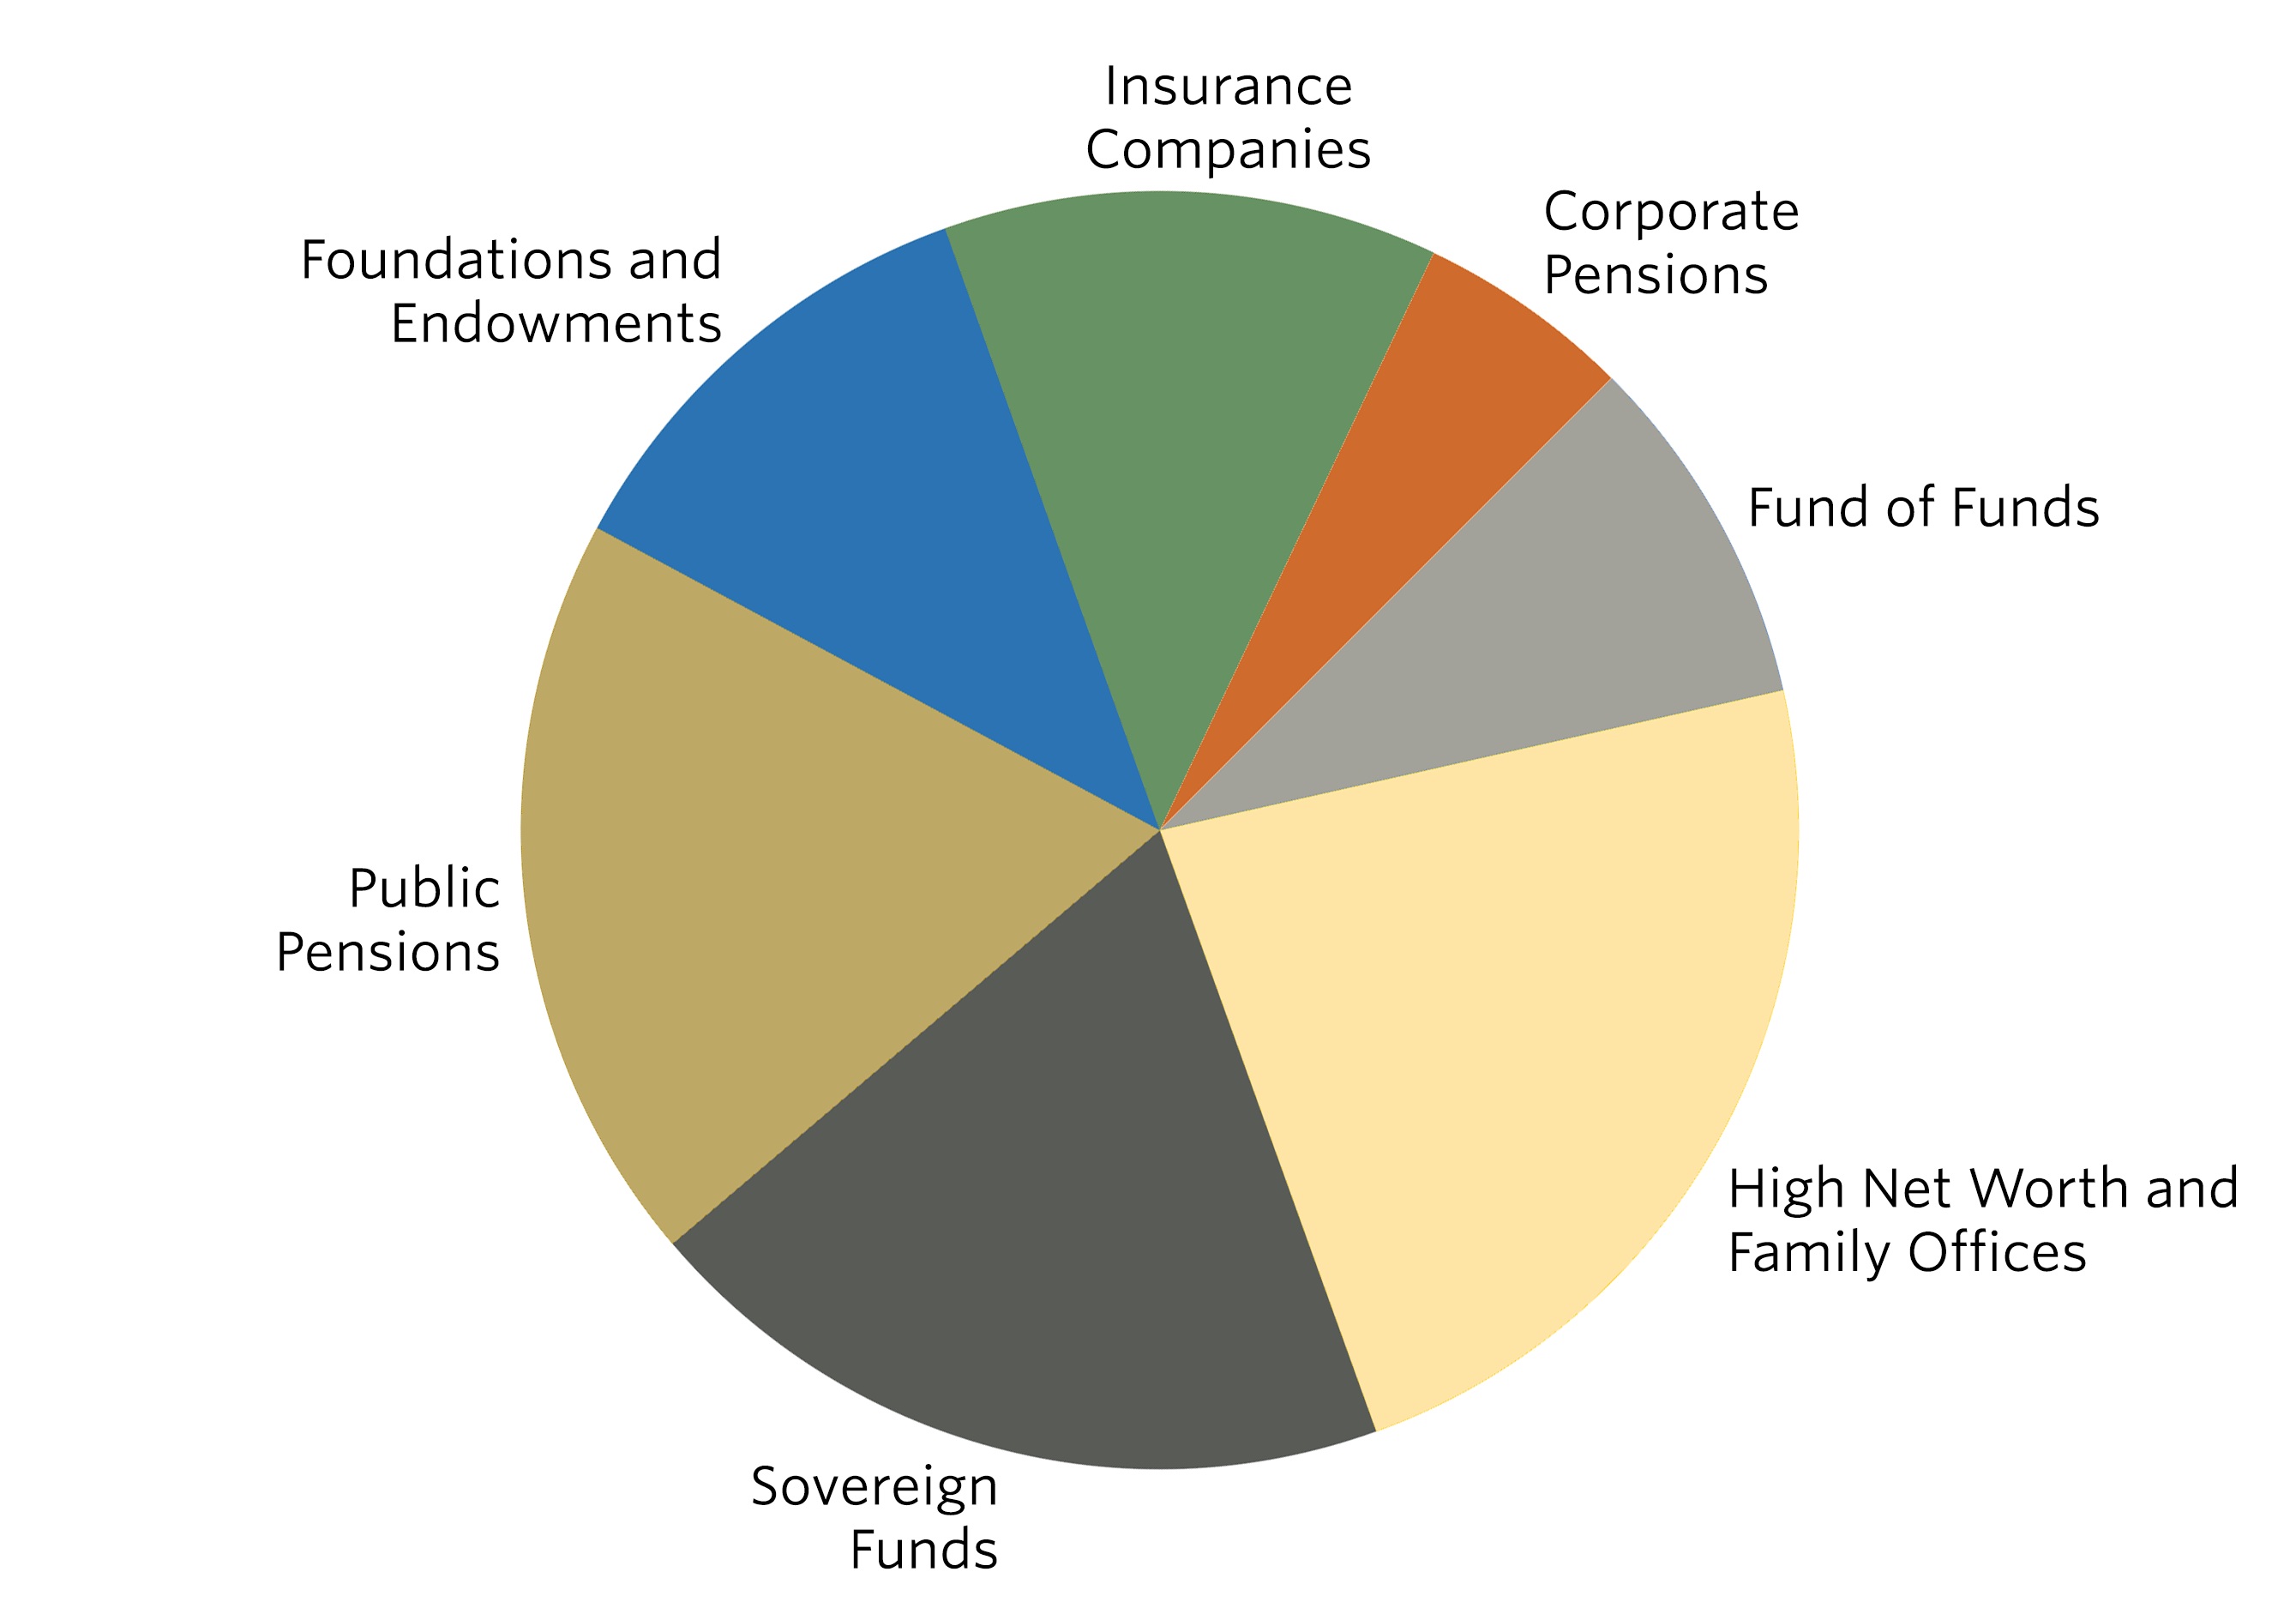 Pie chart showing Investors by Type. Sections include: Insurance Companies (12.51%), Public Pensions (19.04%), Sovereign Funds(19.31%), Fund of Funds(8.98%), Corporate Pensions(5.45%), High Net Worth and Family Offices (23.01%), Foundations and Endowments (11.69%).